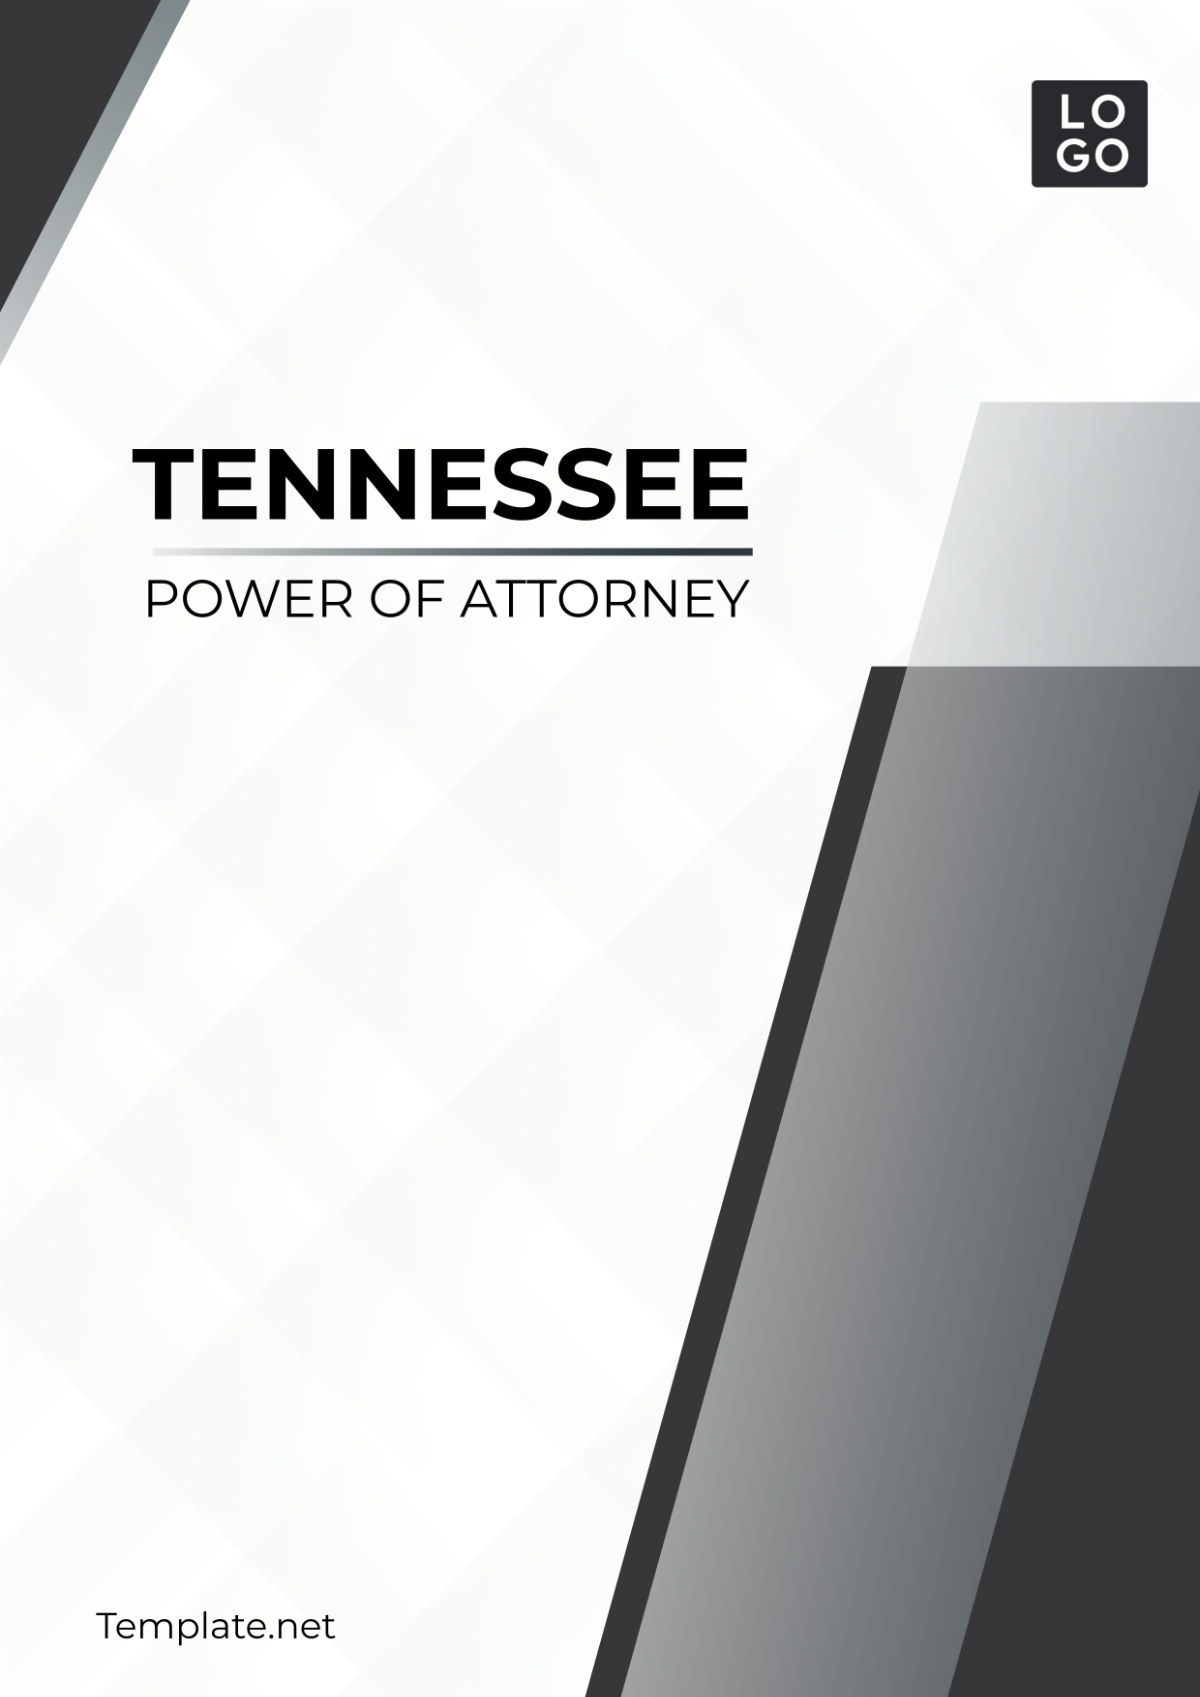 Tennessee Power of Attorney Cover Page Template